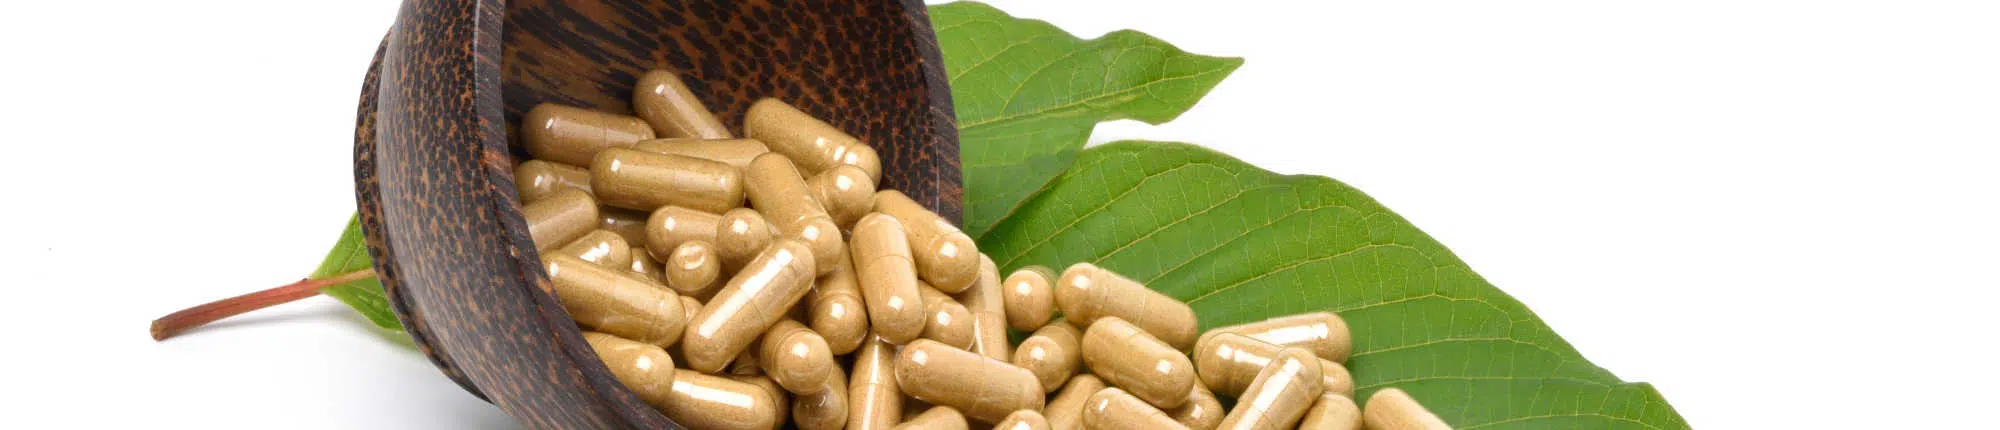 Kratom capsules spilling out of bowl